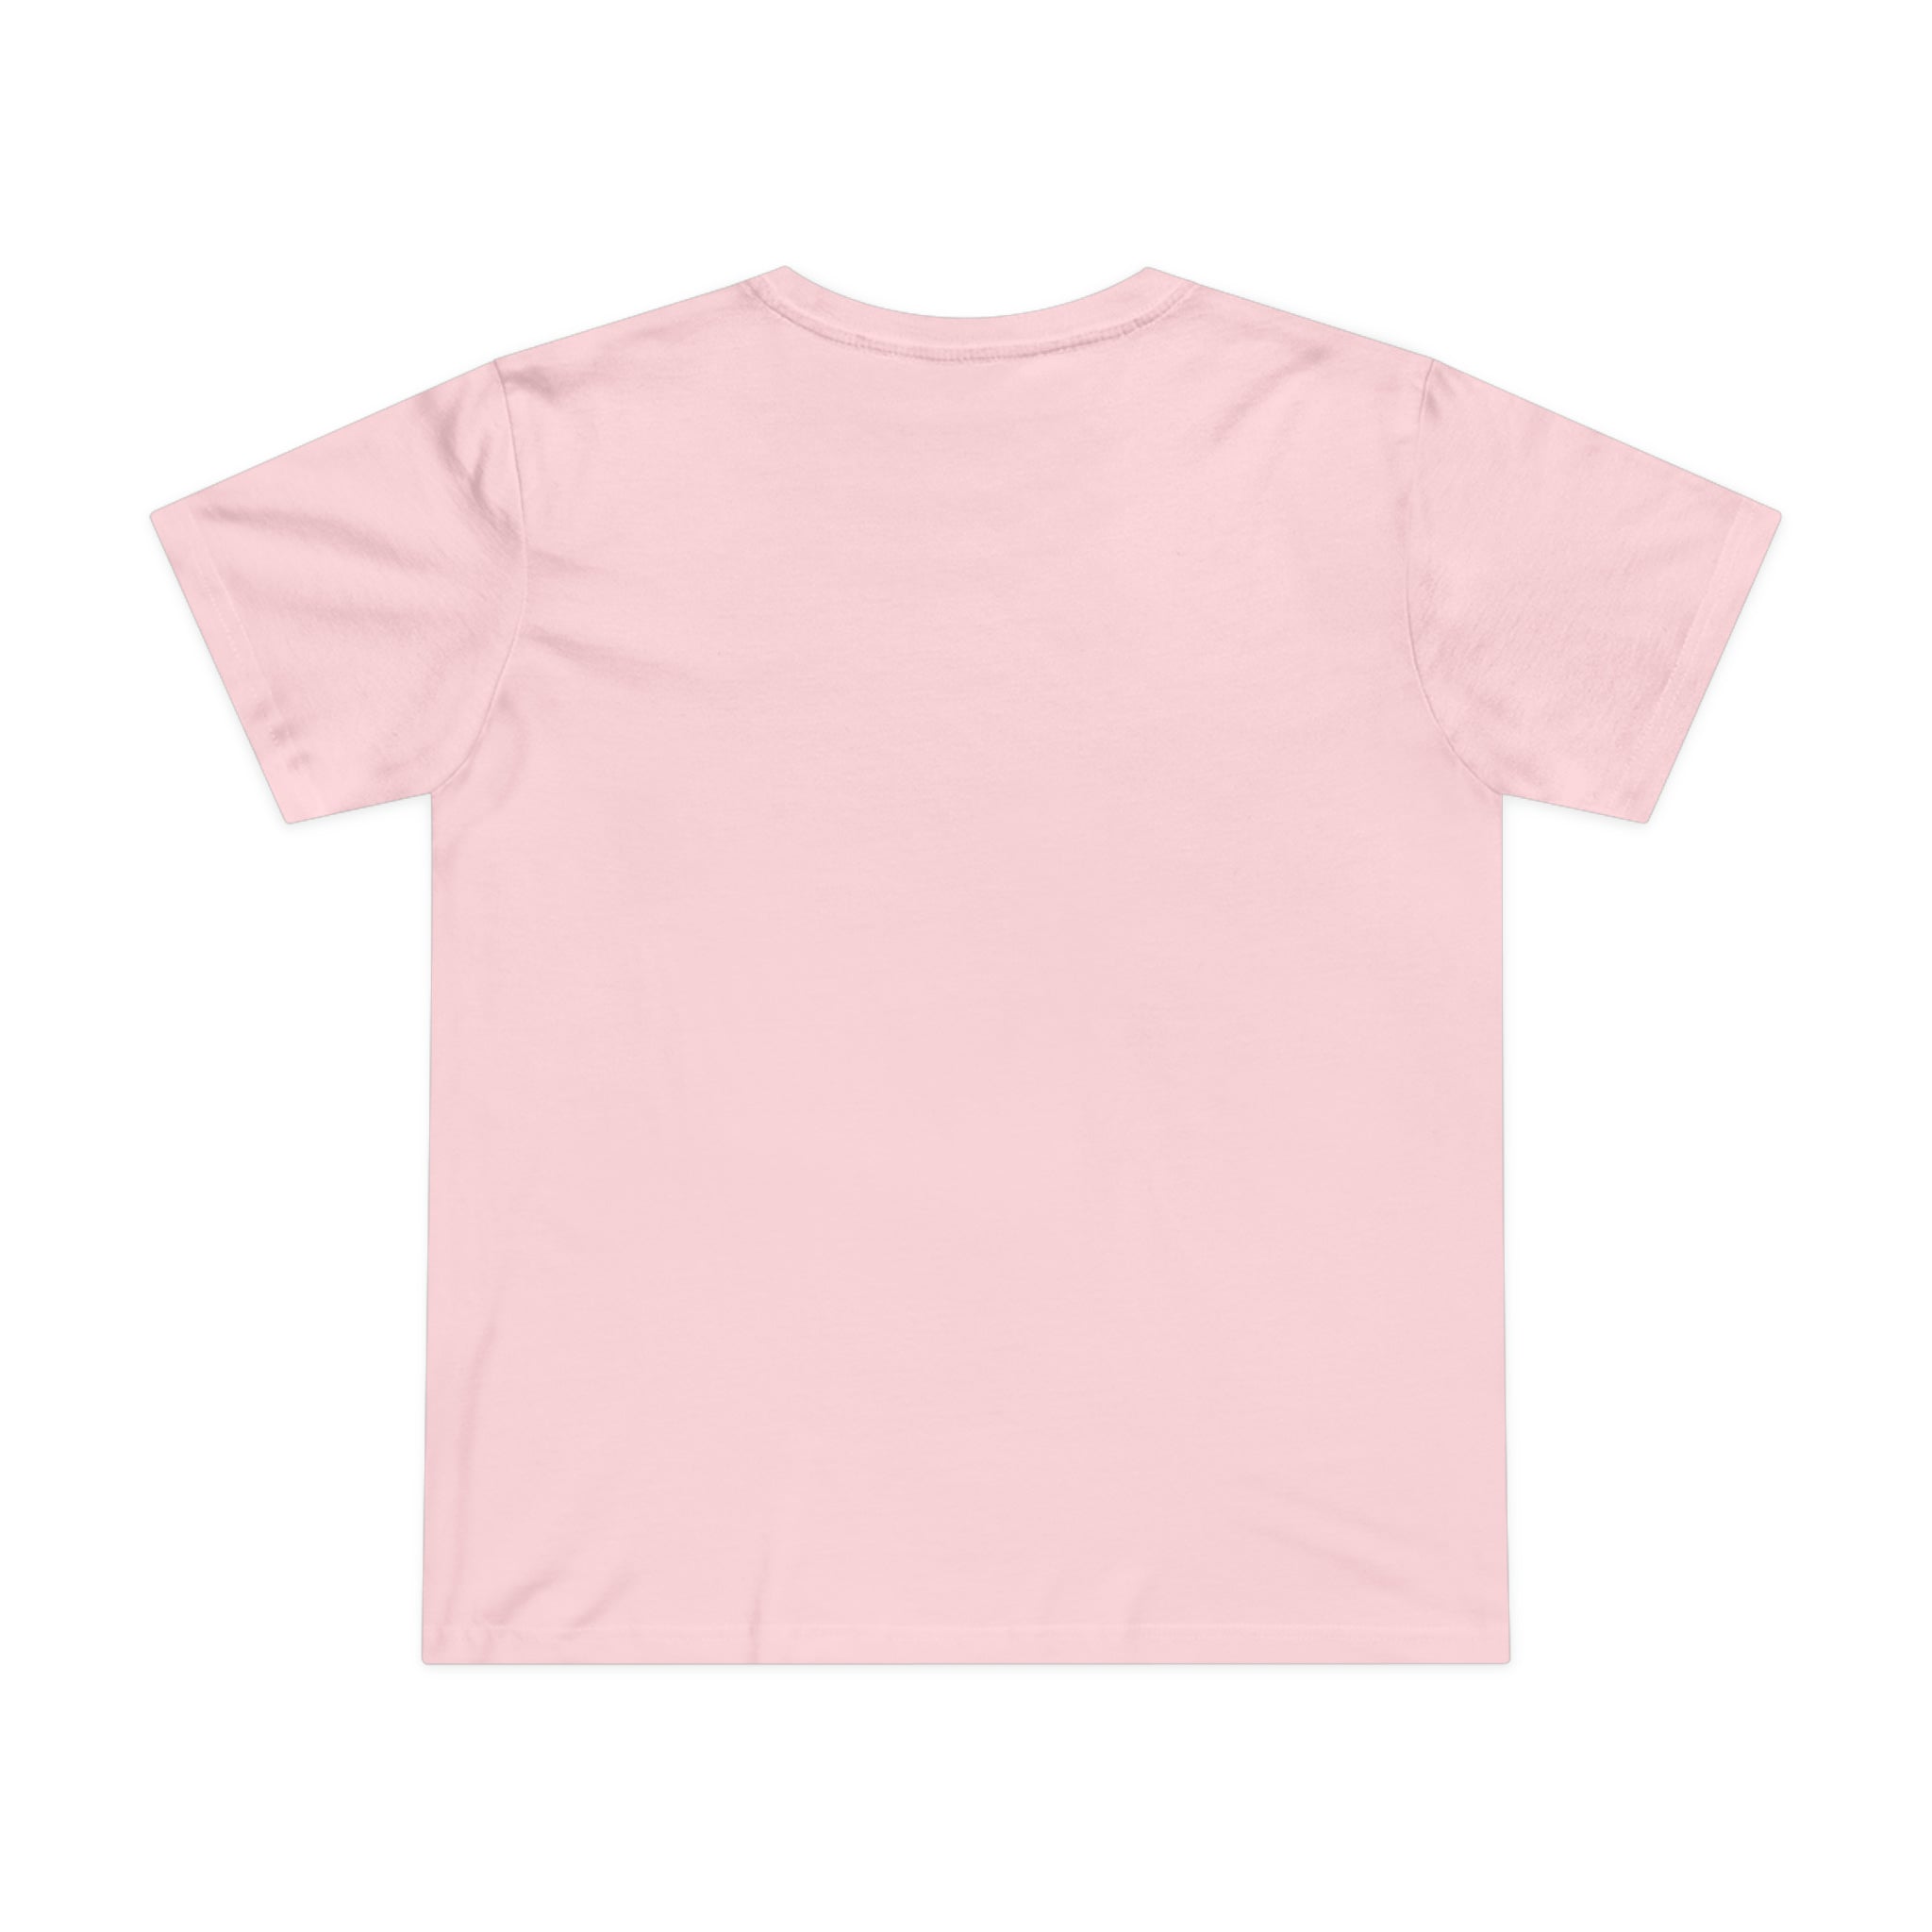 Never Let Fear Stop You - Women’s Maple Tee (DTF)